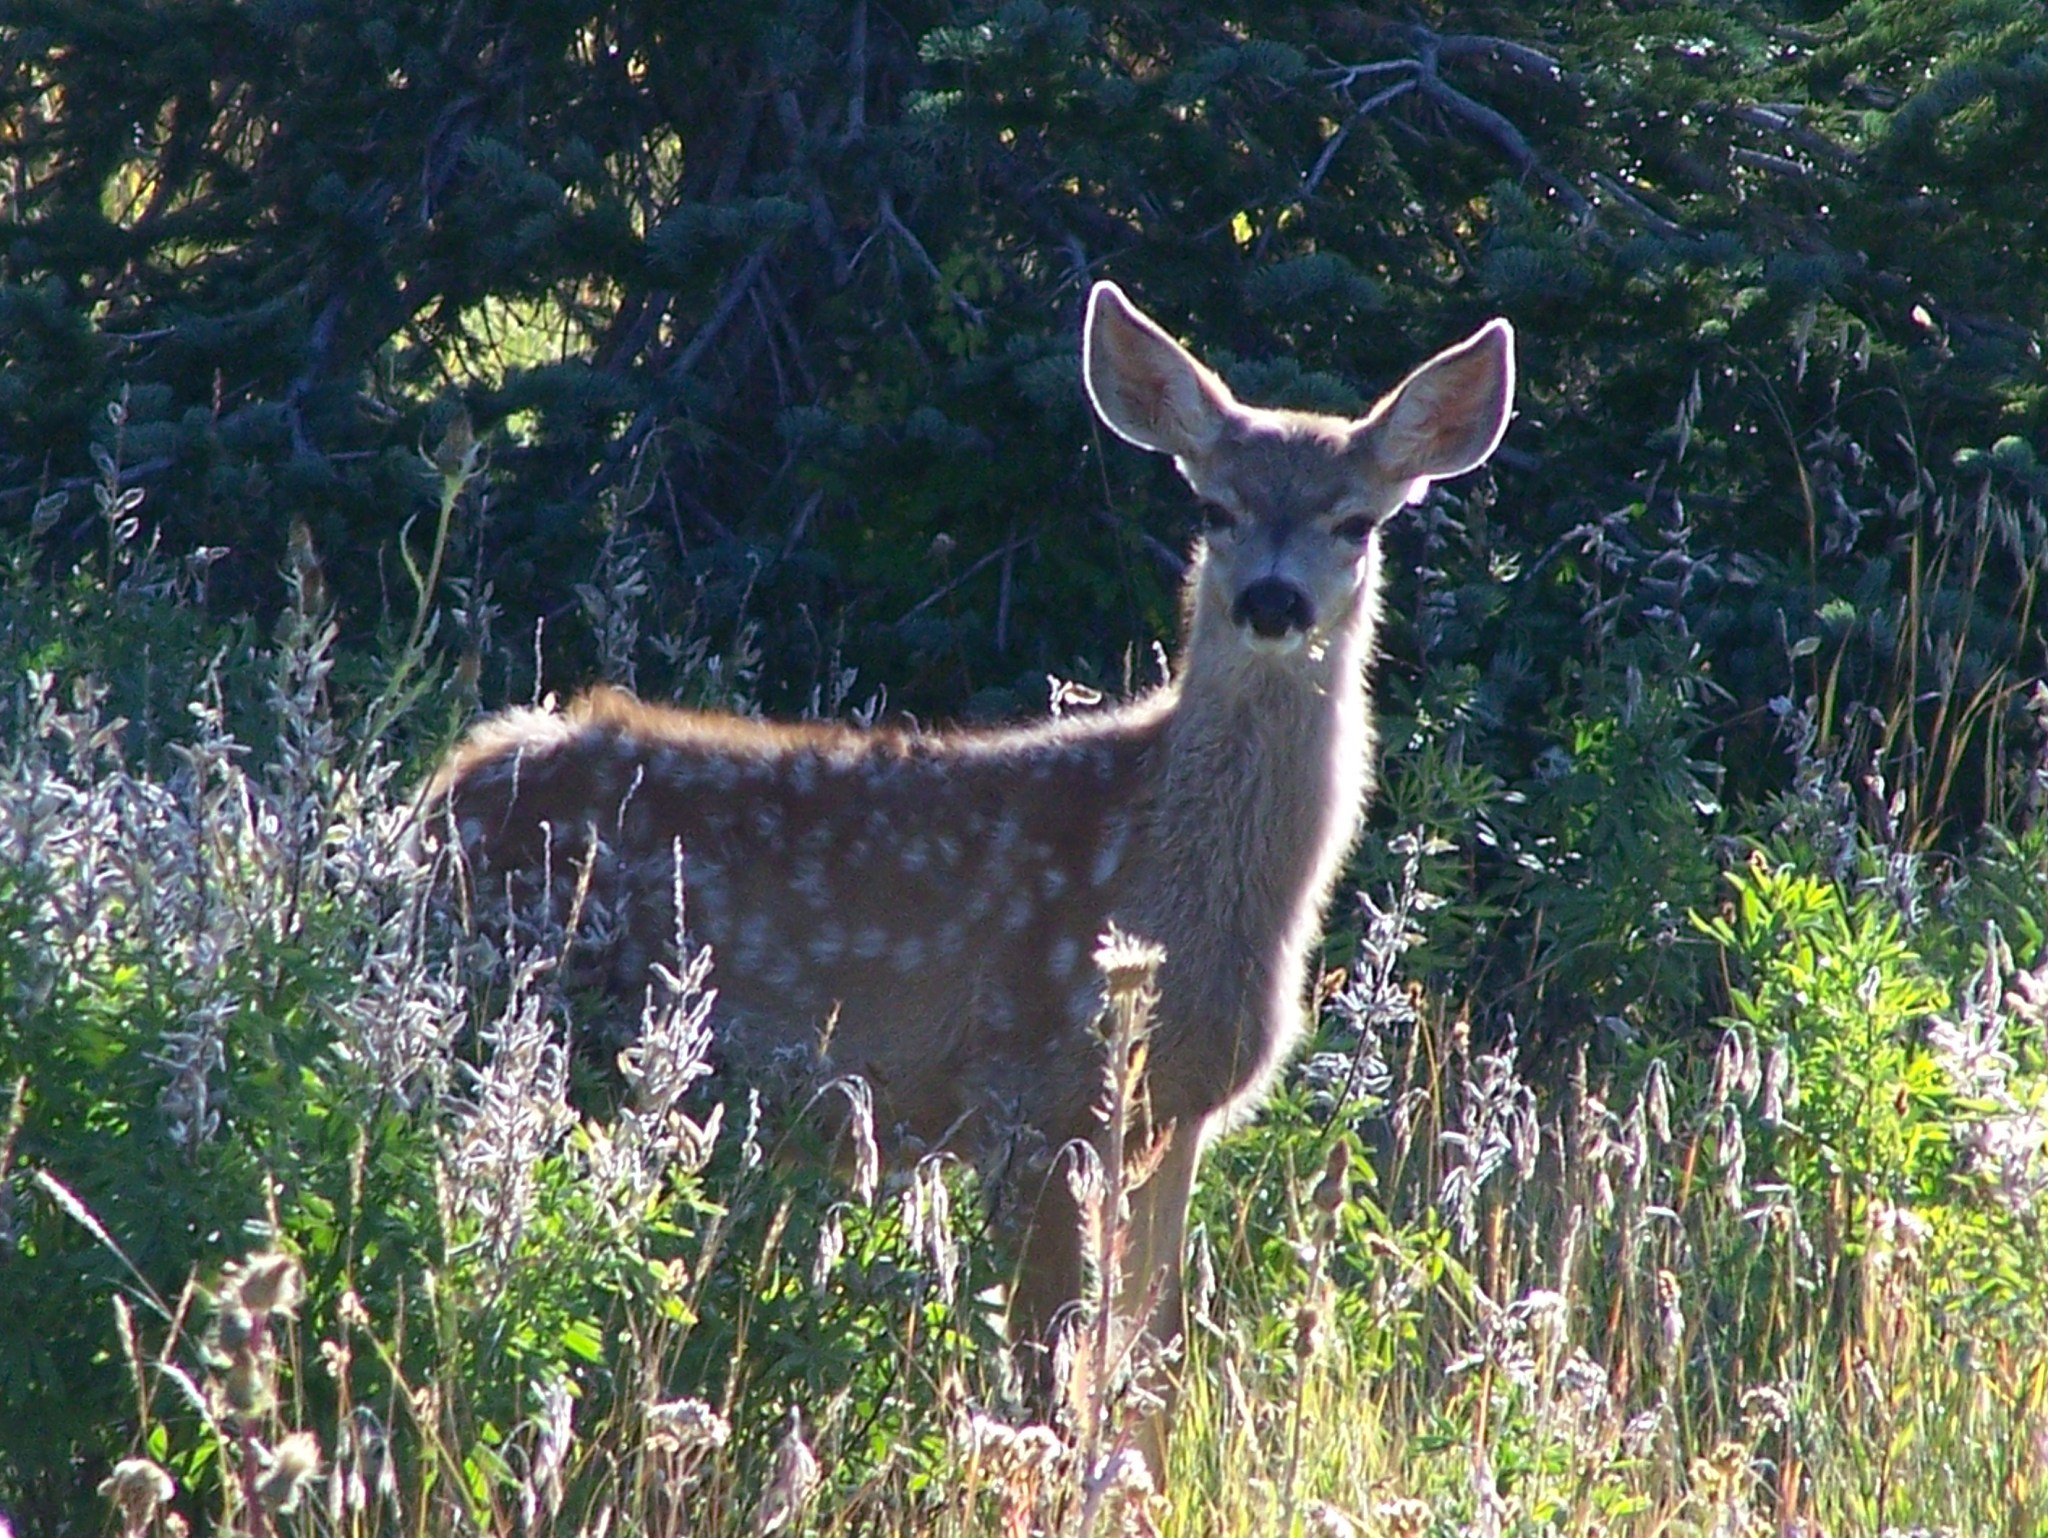 deer fawn emerges from foliage